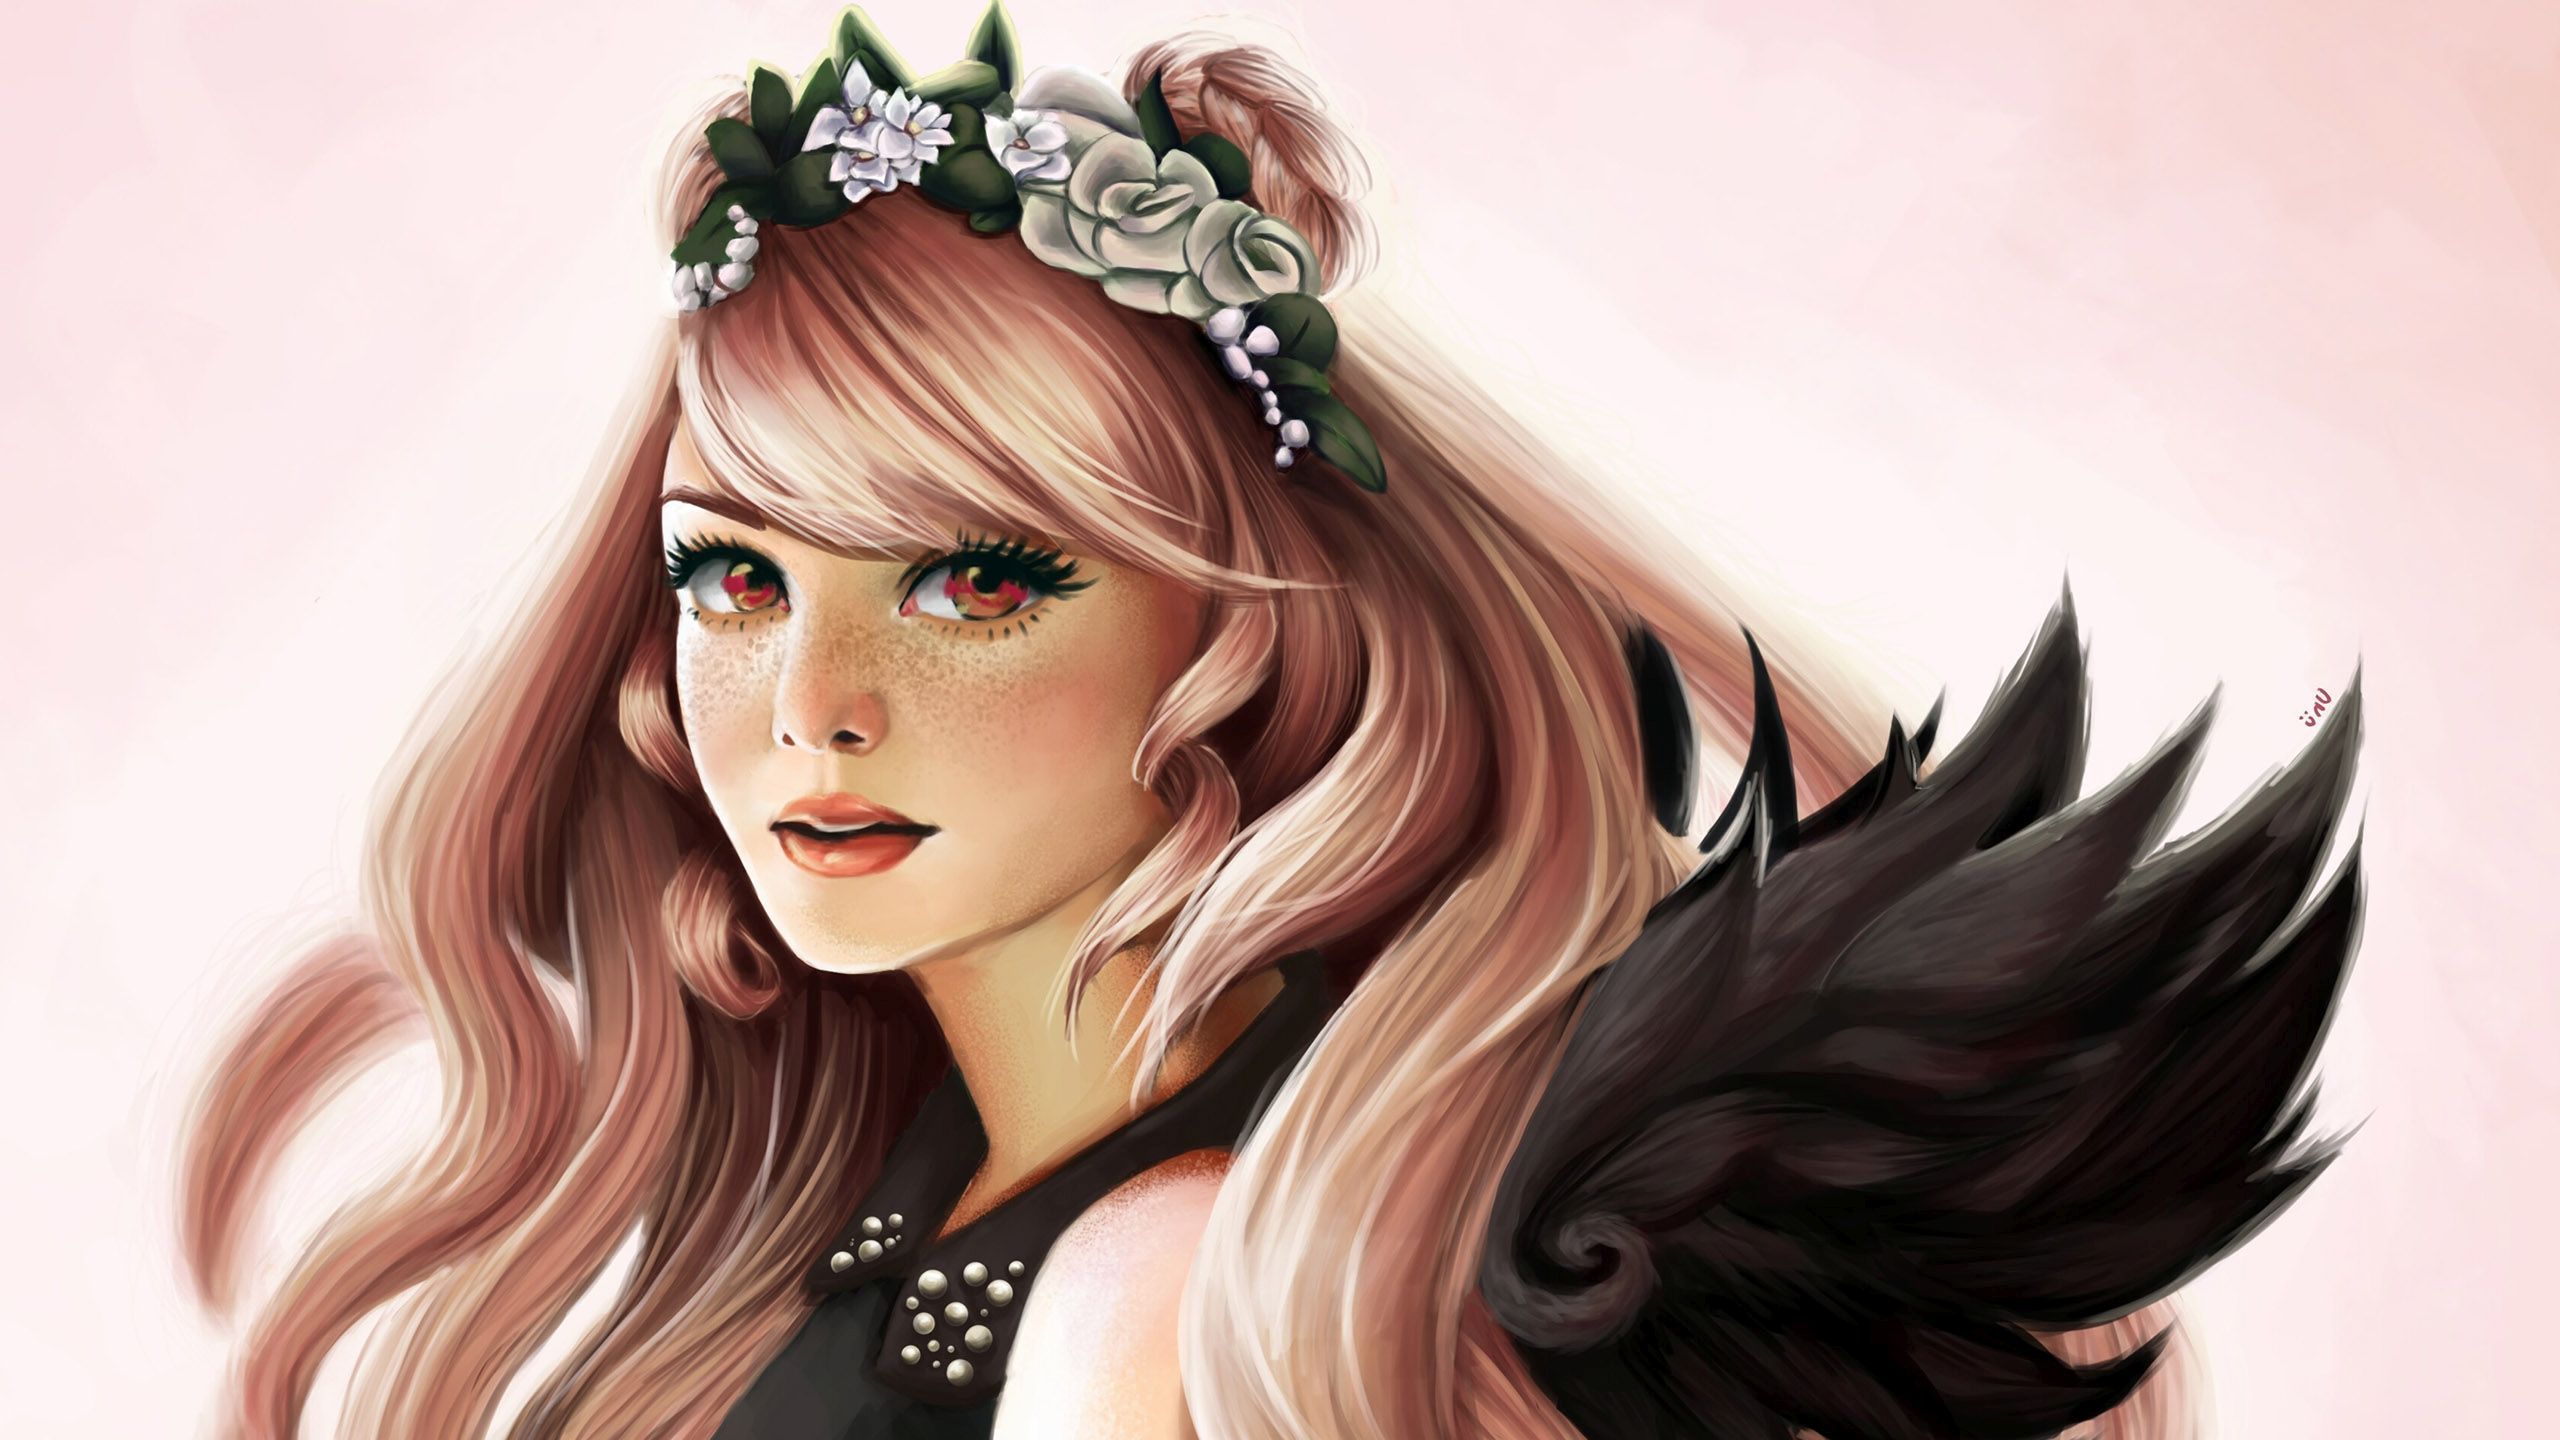 Fantasy Girl Woman Face Flower Wreath Red Eyes Freckles 2560x1440